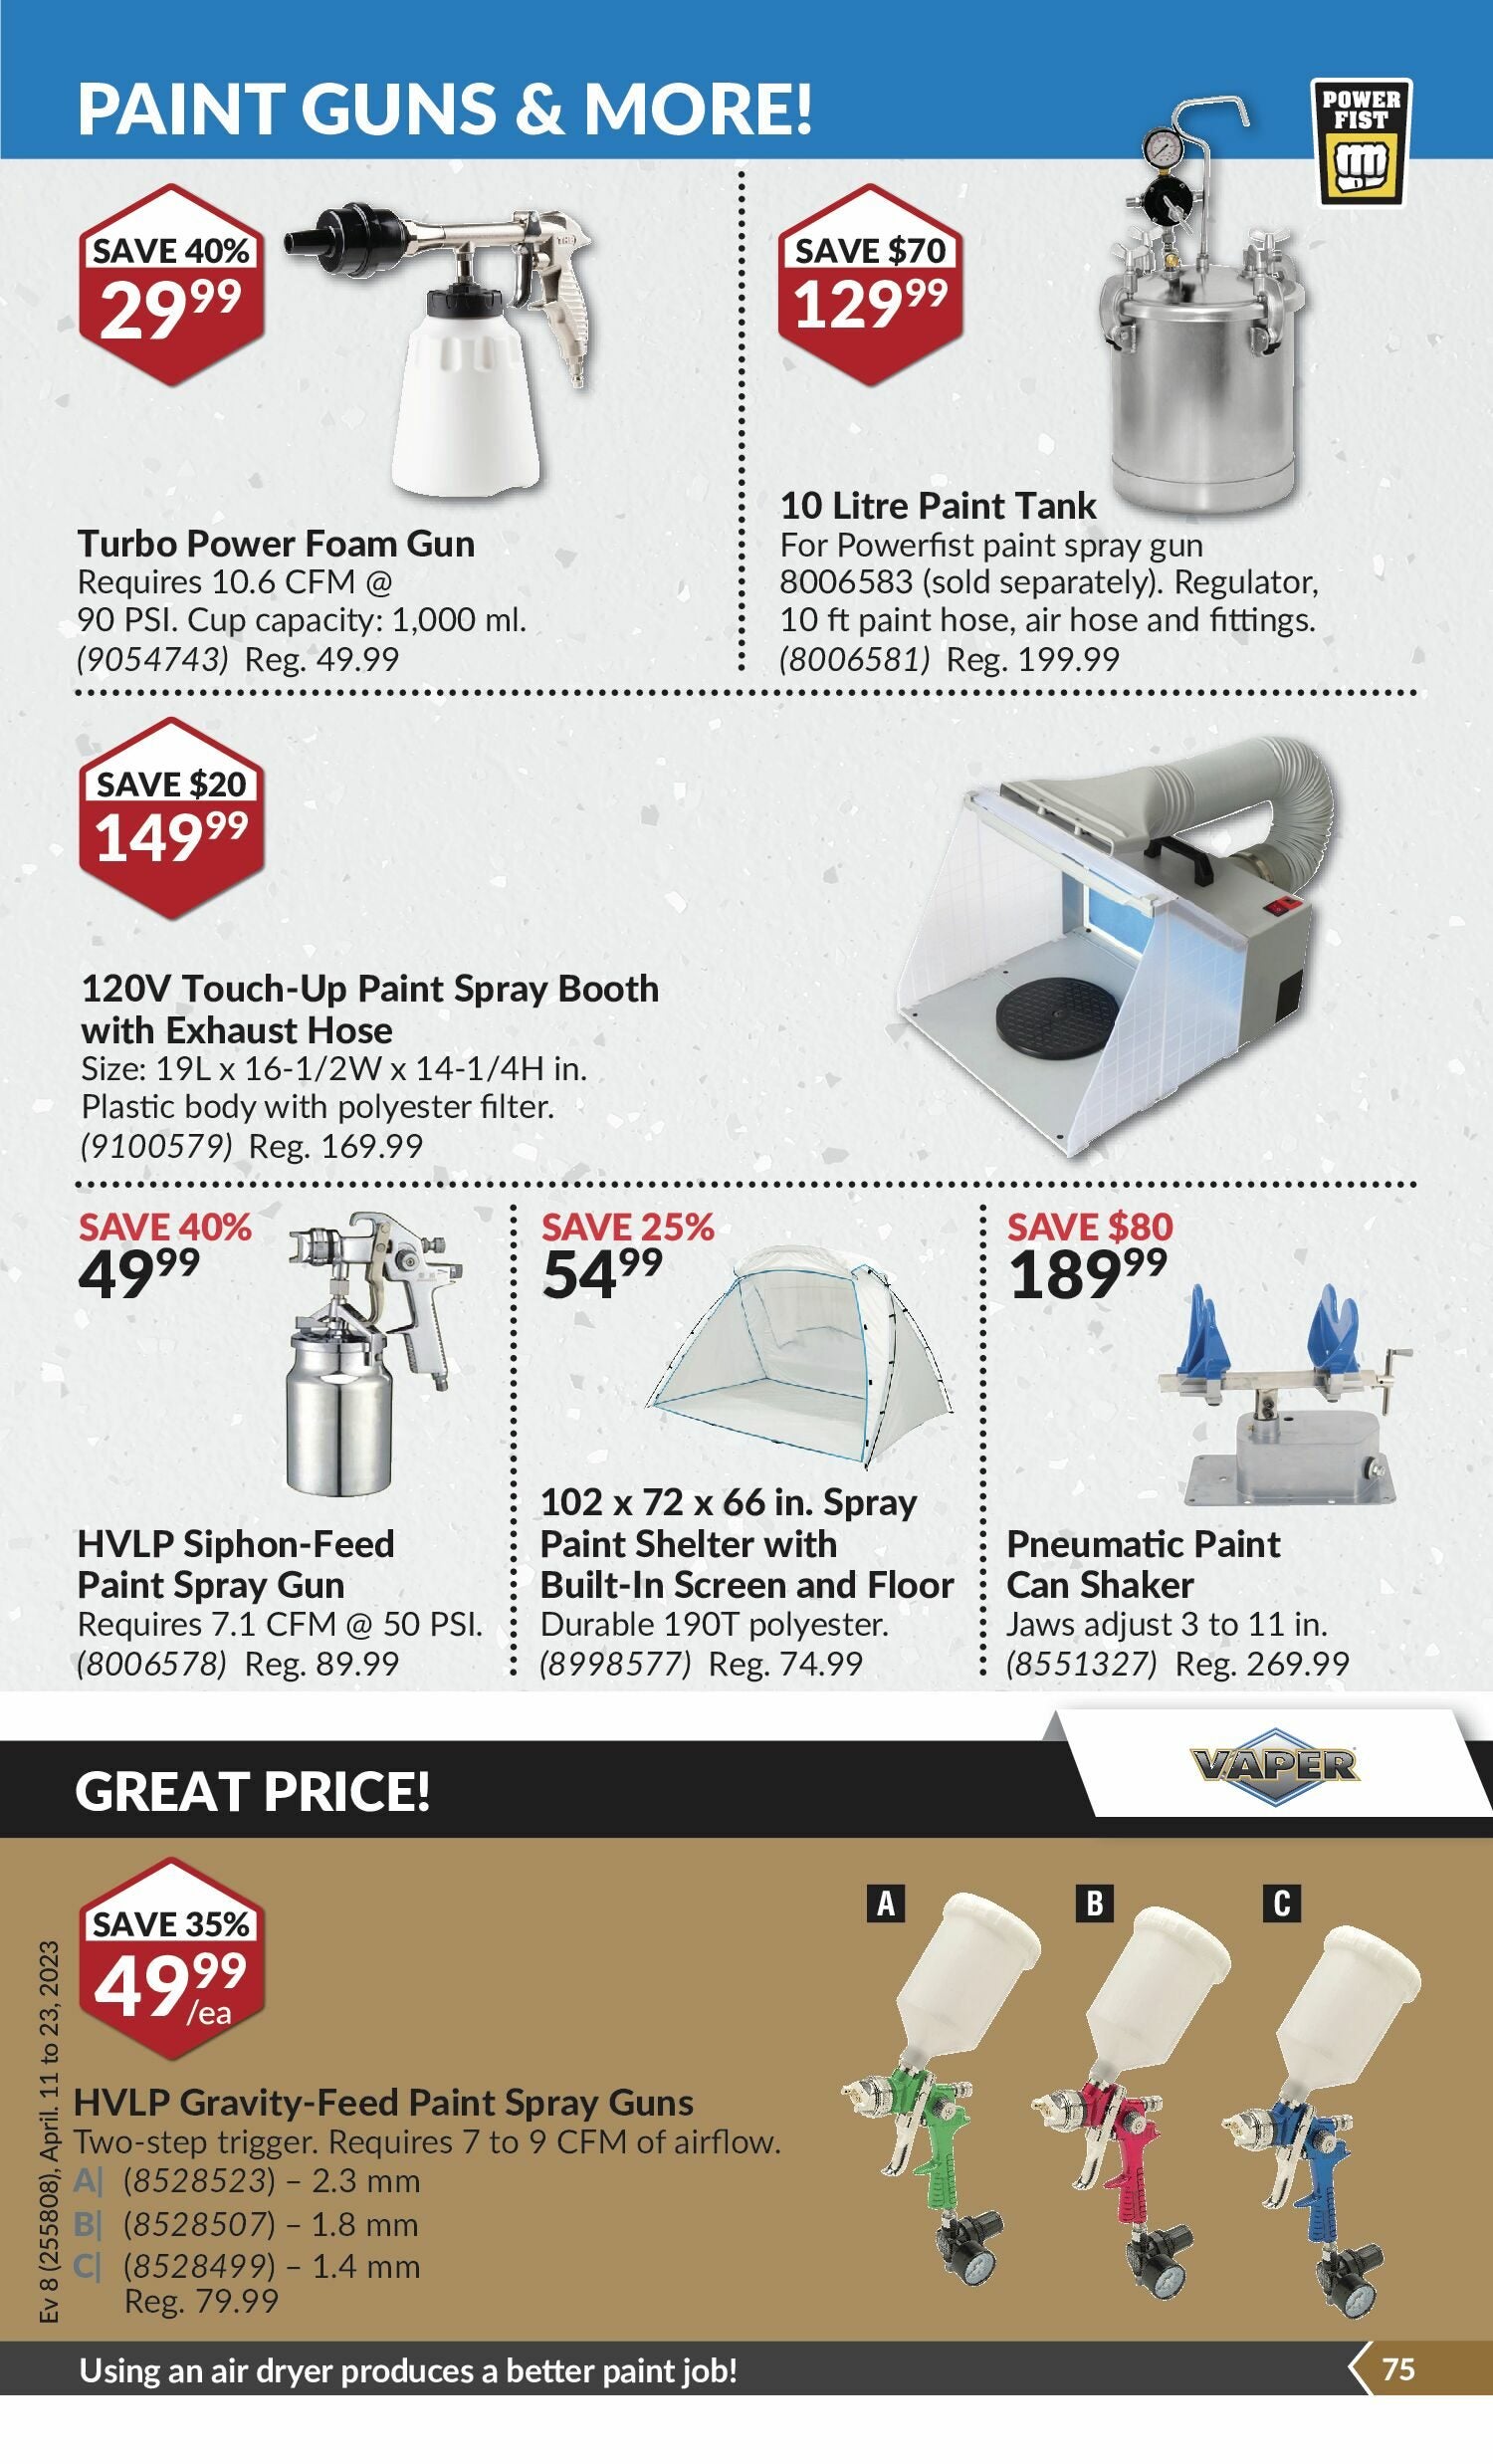 Princess Auto Weekly Flyer - 2 Week Sale - Helping You Along The